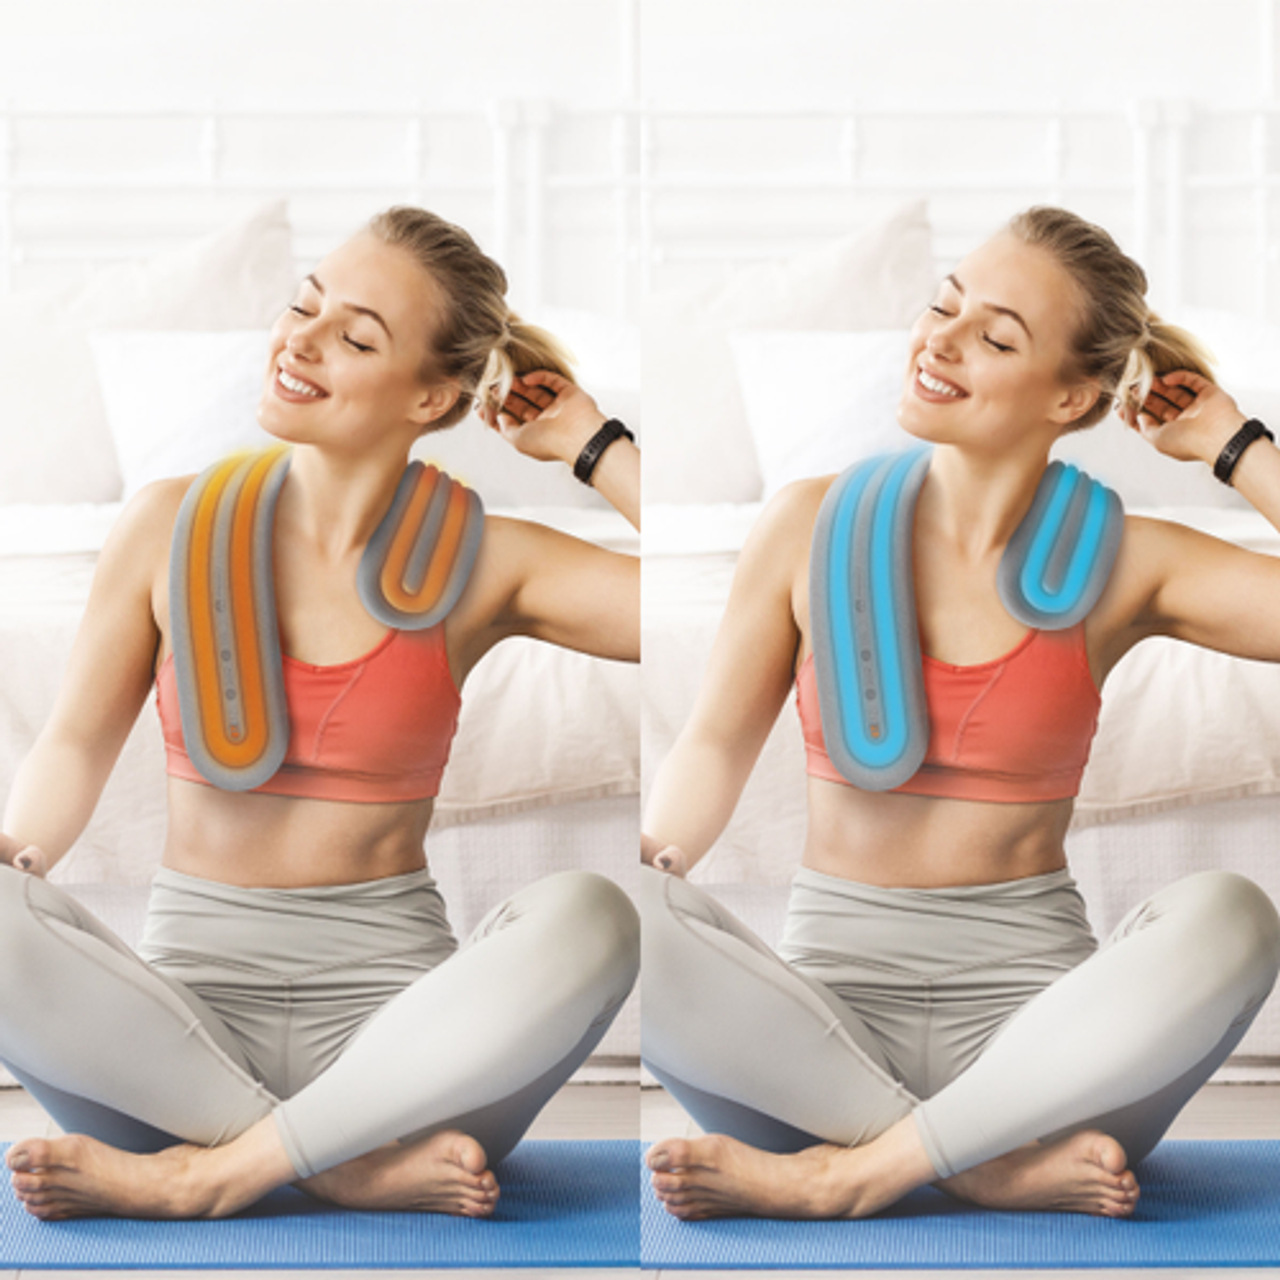 Sharper Image - Hot + Cold Body Wrap, Dual Intensity Soft Fabric for Neck, Shoulders, Legs & Arms - Gray